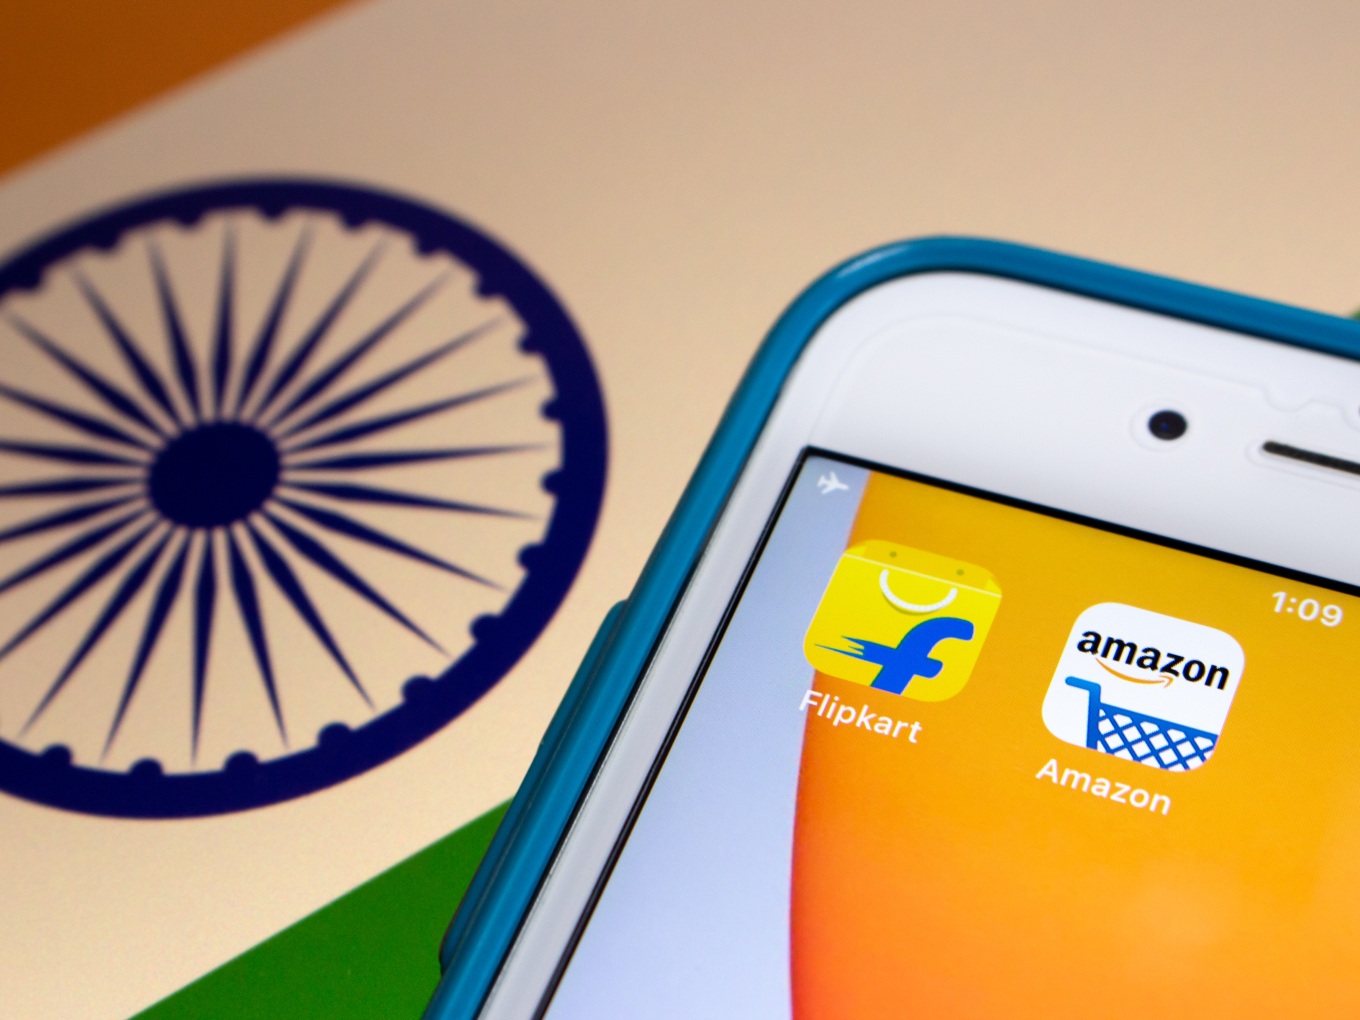 Flipkart, Amazon Likely To See Major Impact Once Again As India Mulls New Ecommerce FDI Rules